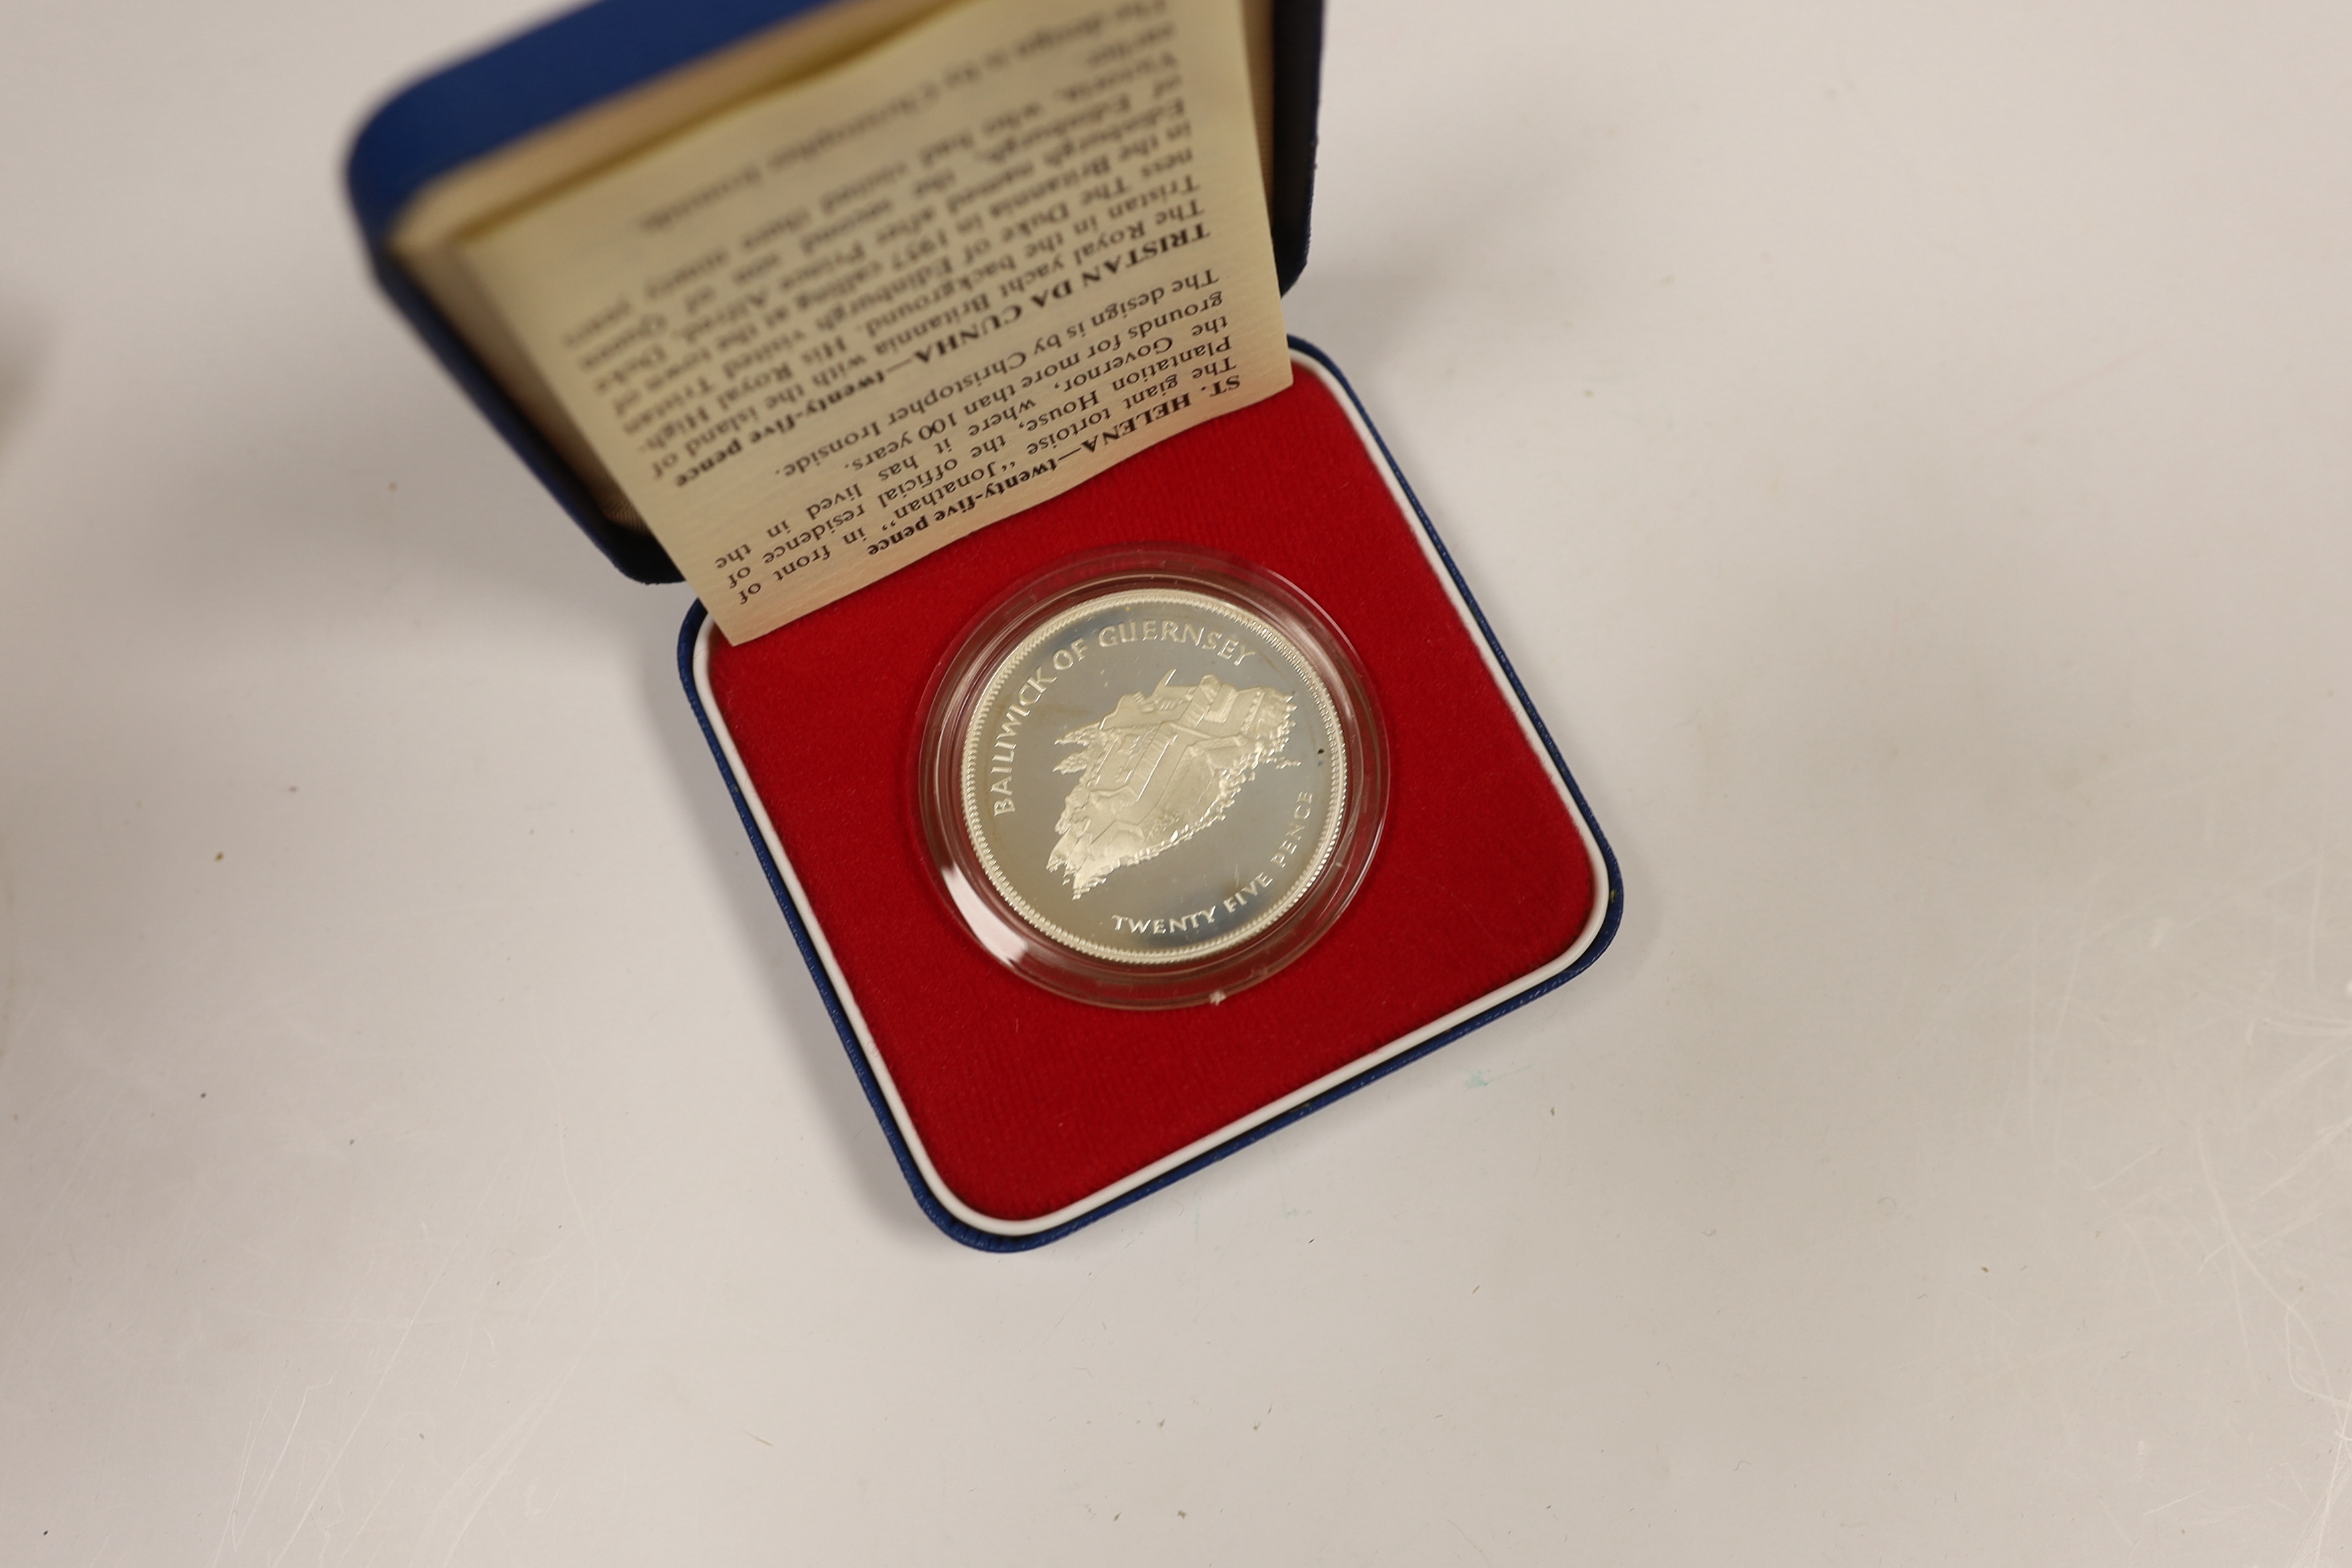 British and Commonwealth QEII proof silver commemorative coins, comprising twenty five pence coins - Image 2 of 2